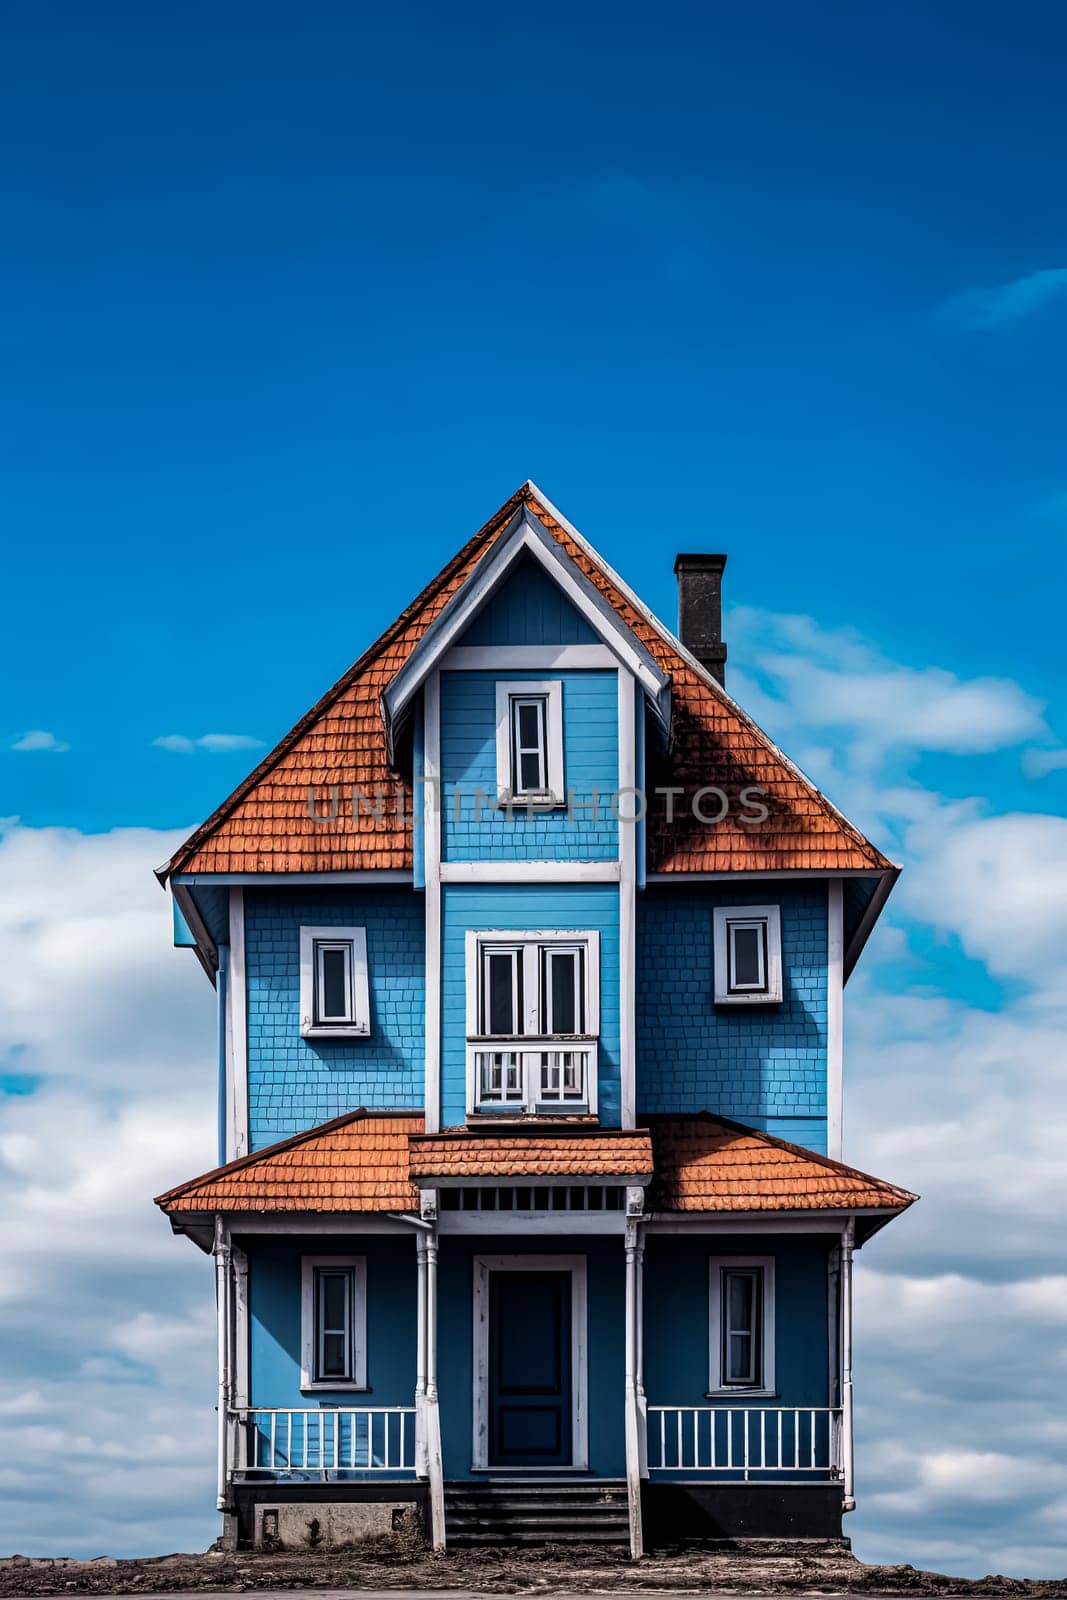 A blue house with a red roof and white trim by Alla_Morozova93